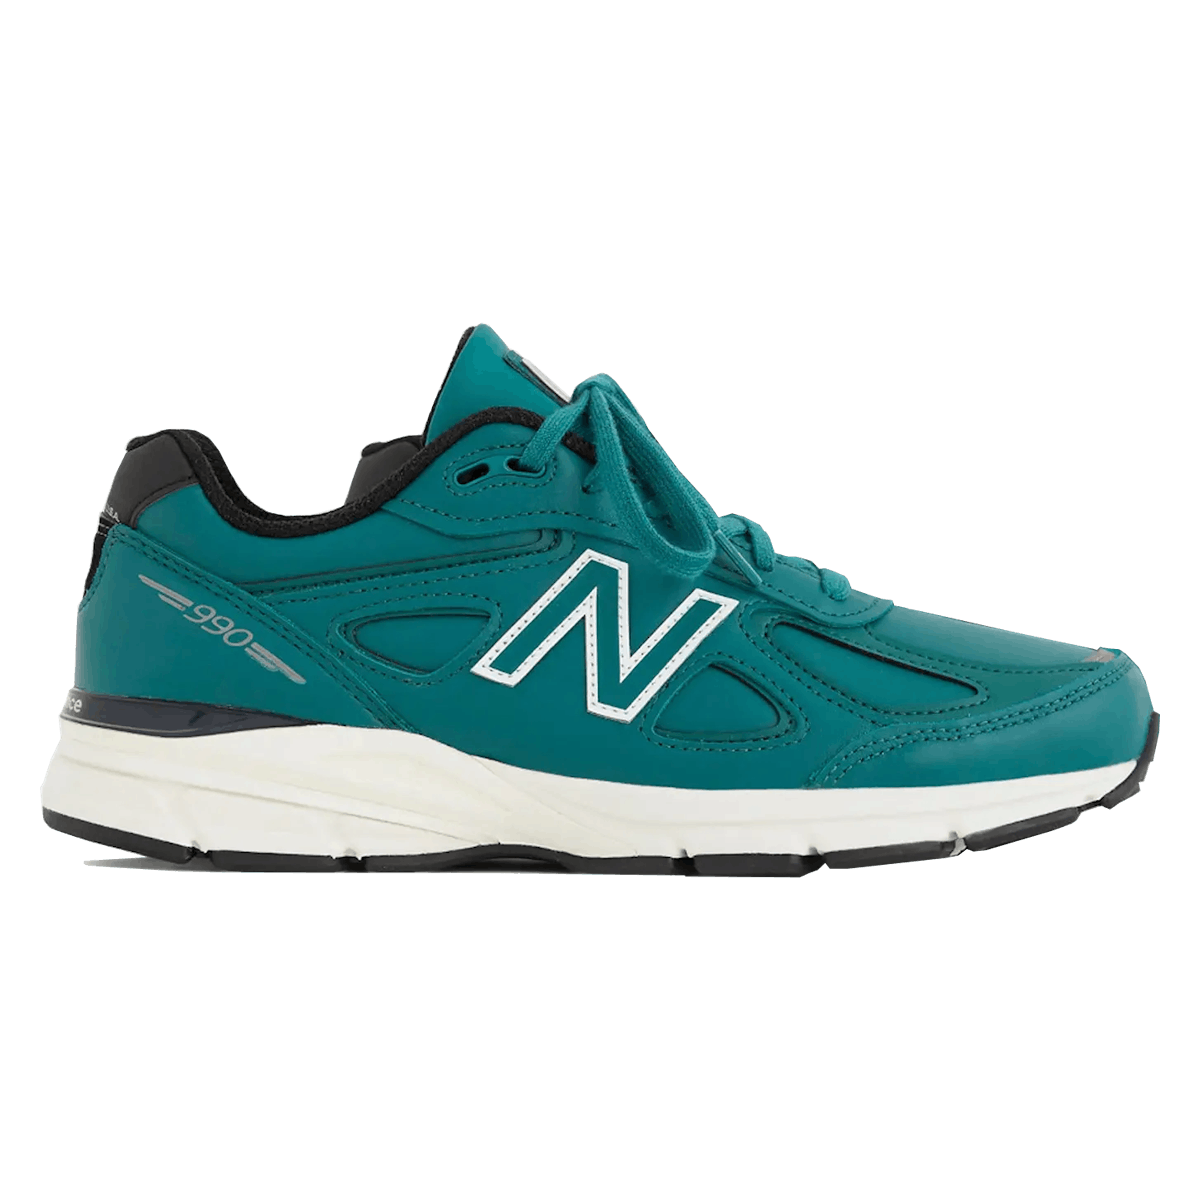 New Balance Made in USA 990v4 "Teal"